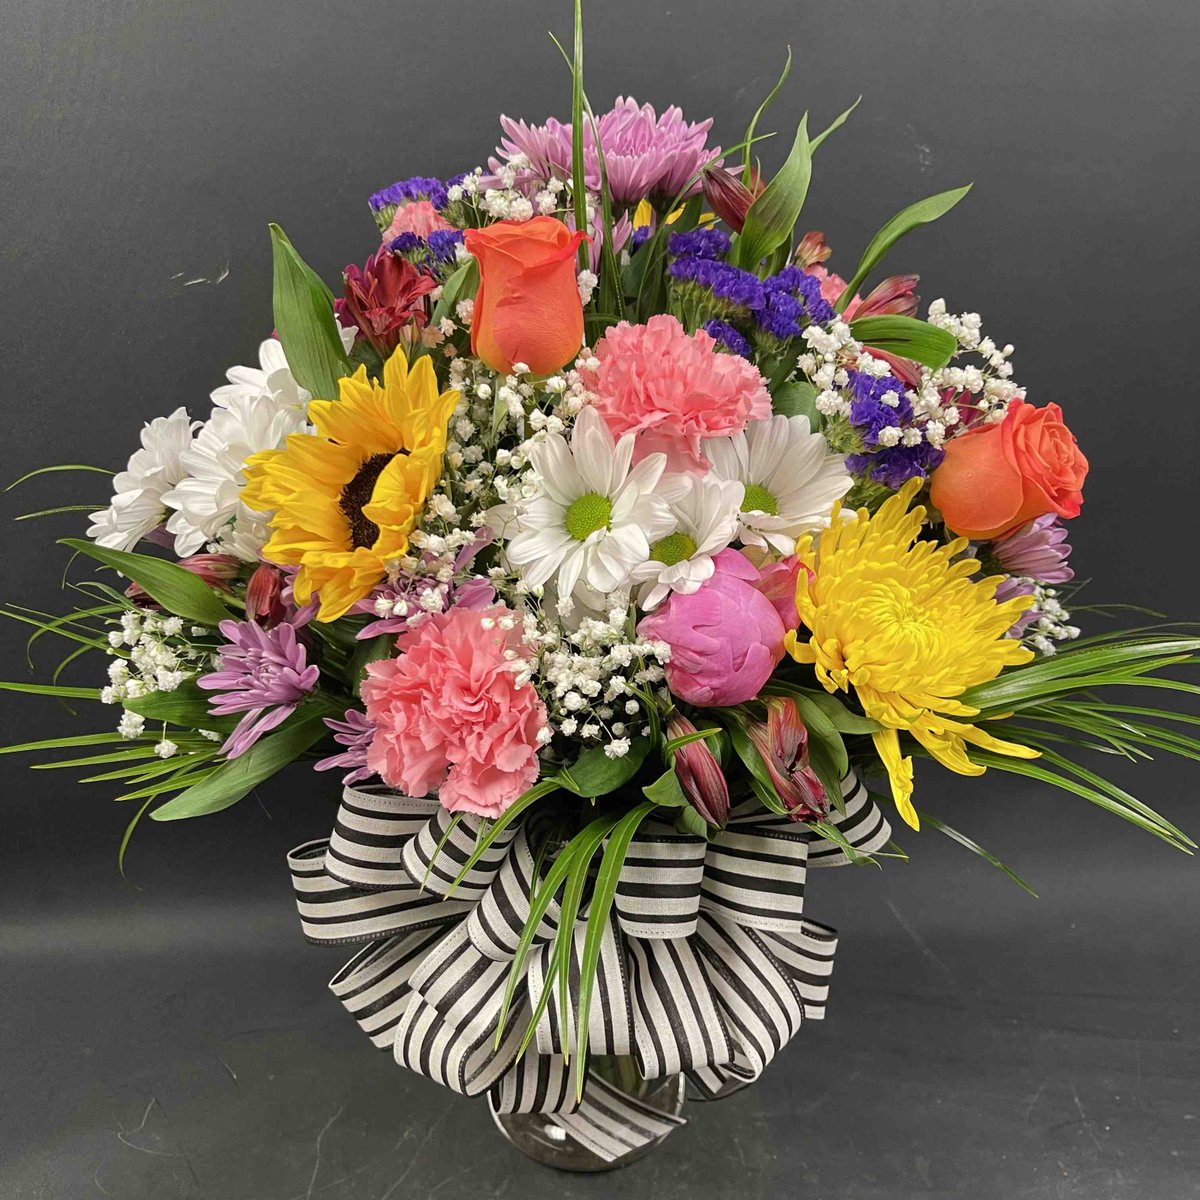 Making pretty things. 💐 The striped ribbon is a fun accent if we do say so ourselves. 😉
#steinflorist #steinyourflorist #flowers #florist #flowershop #floristry #shopsmall #shoplocal #smallbusiness #phillyflorist #philadelphiaflorist #NJflorist #beautiful #flora #floral #flores